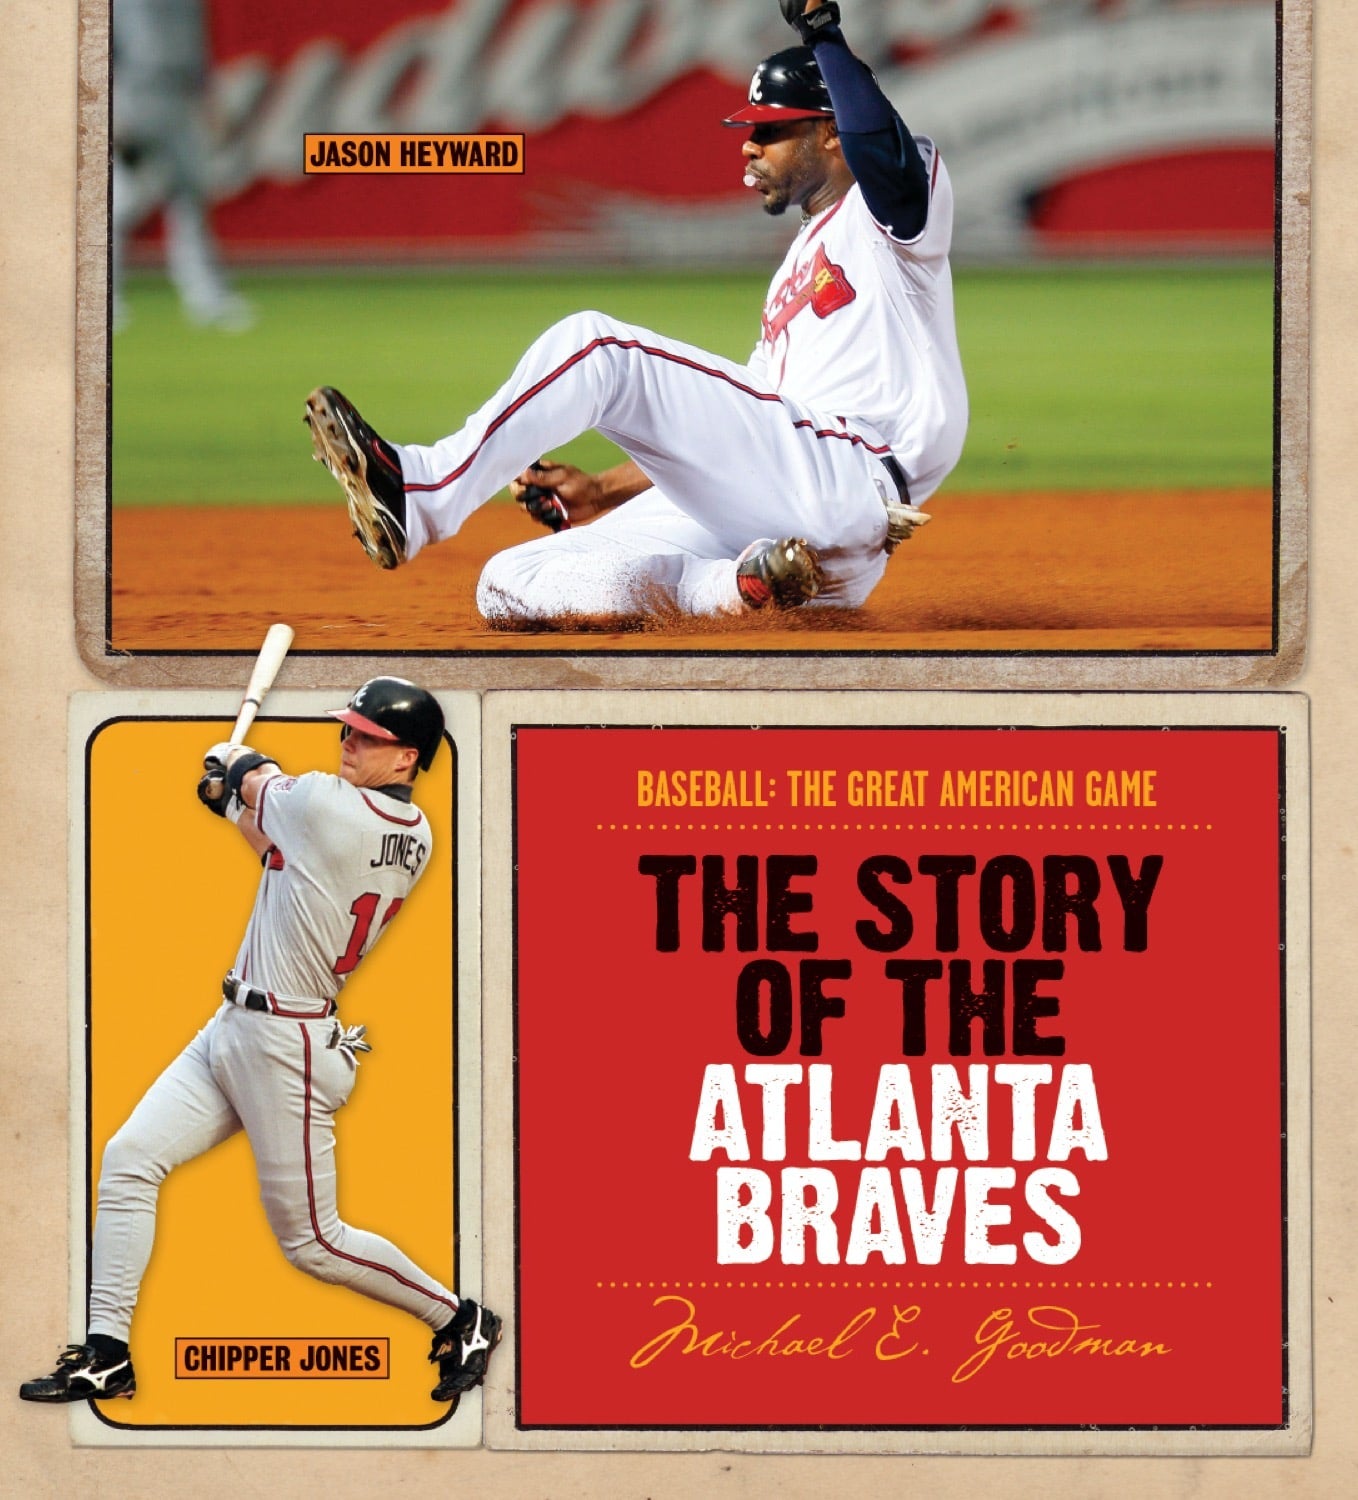 Baseball: The Great American Game: The Story of Atlanta Braves